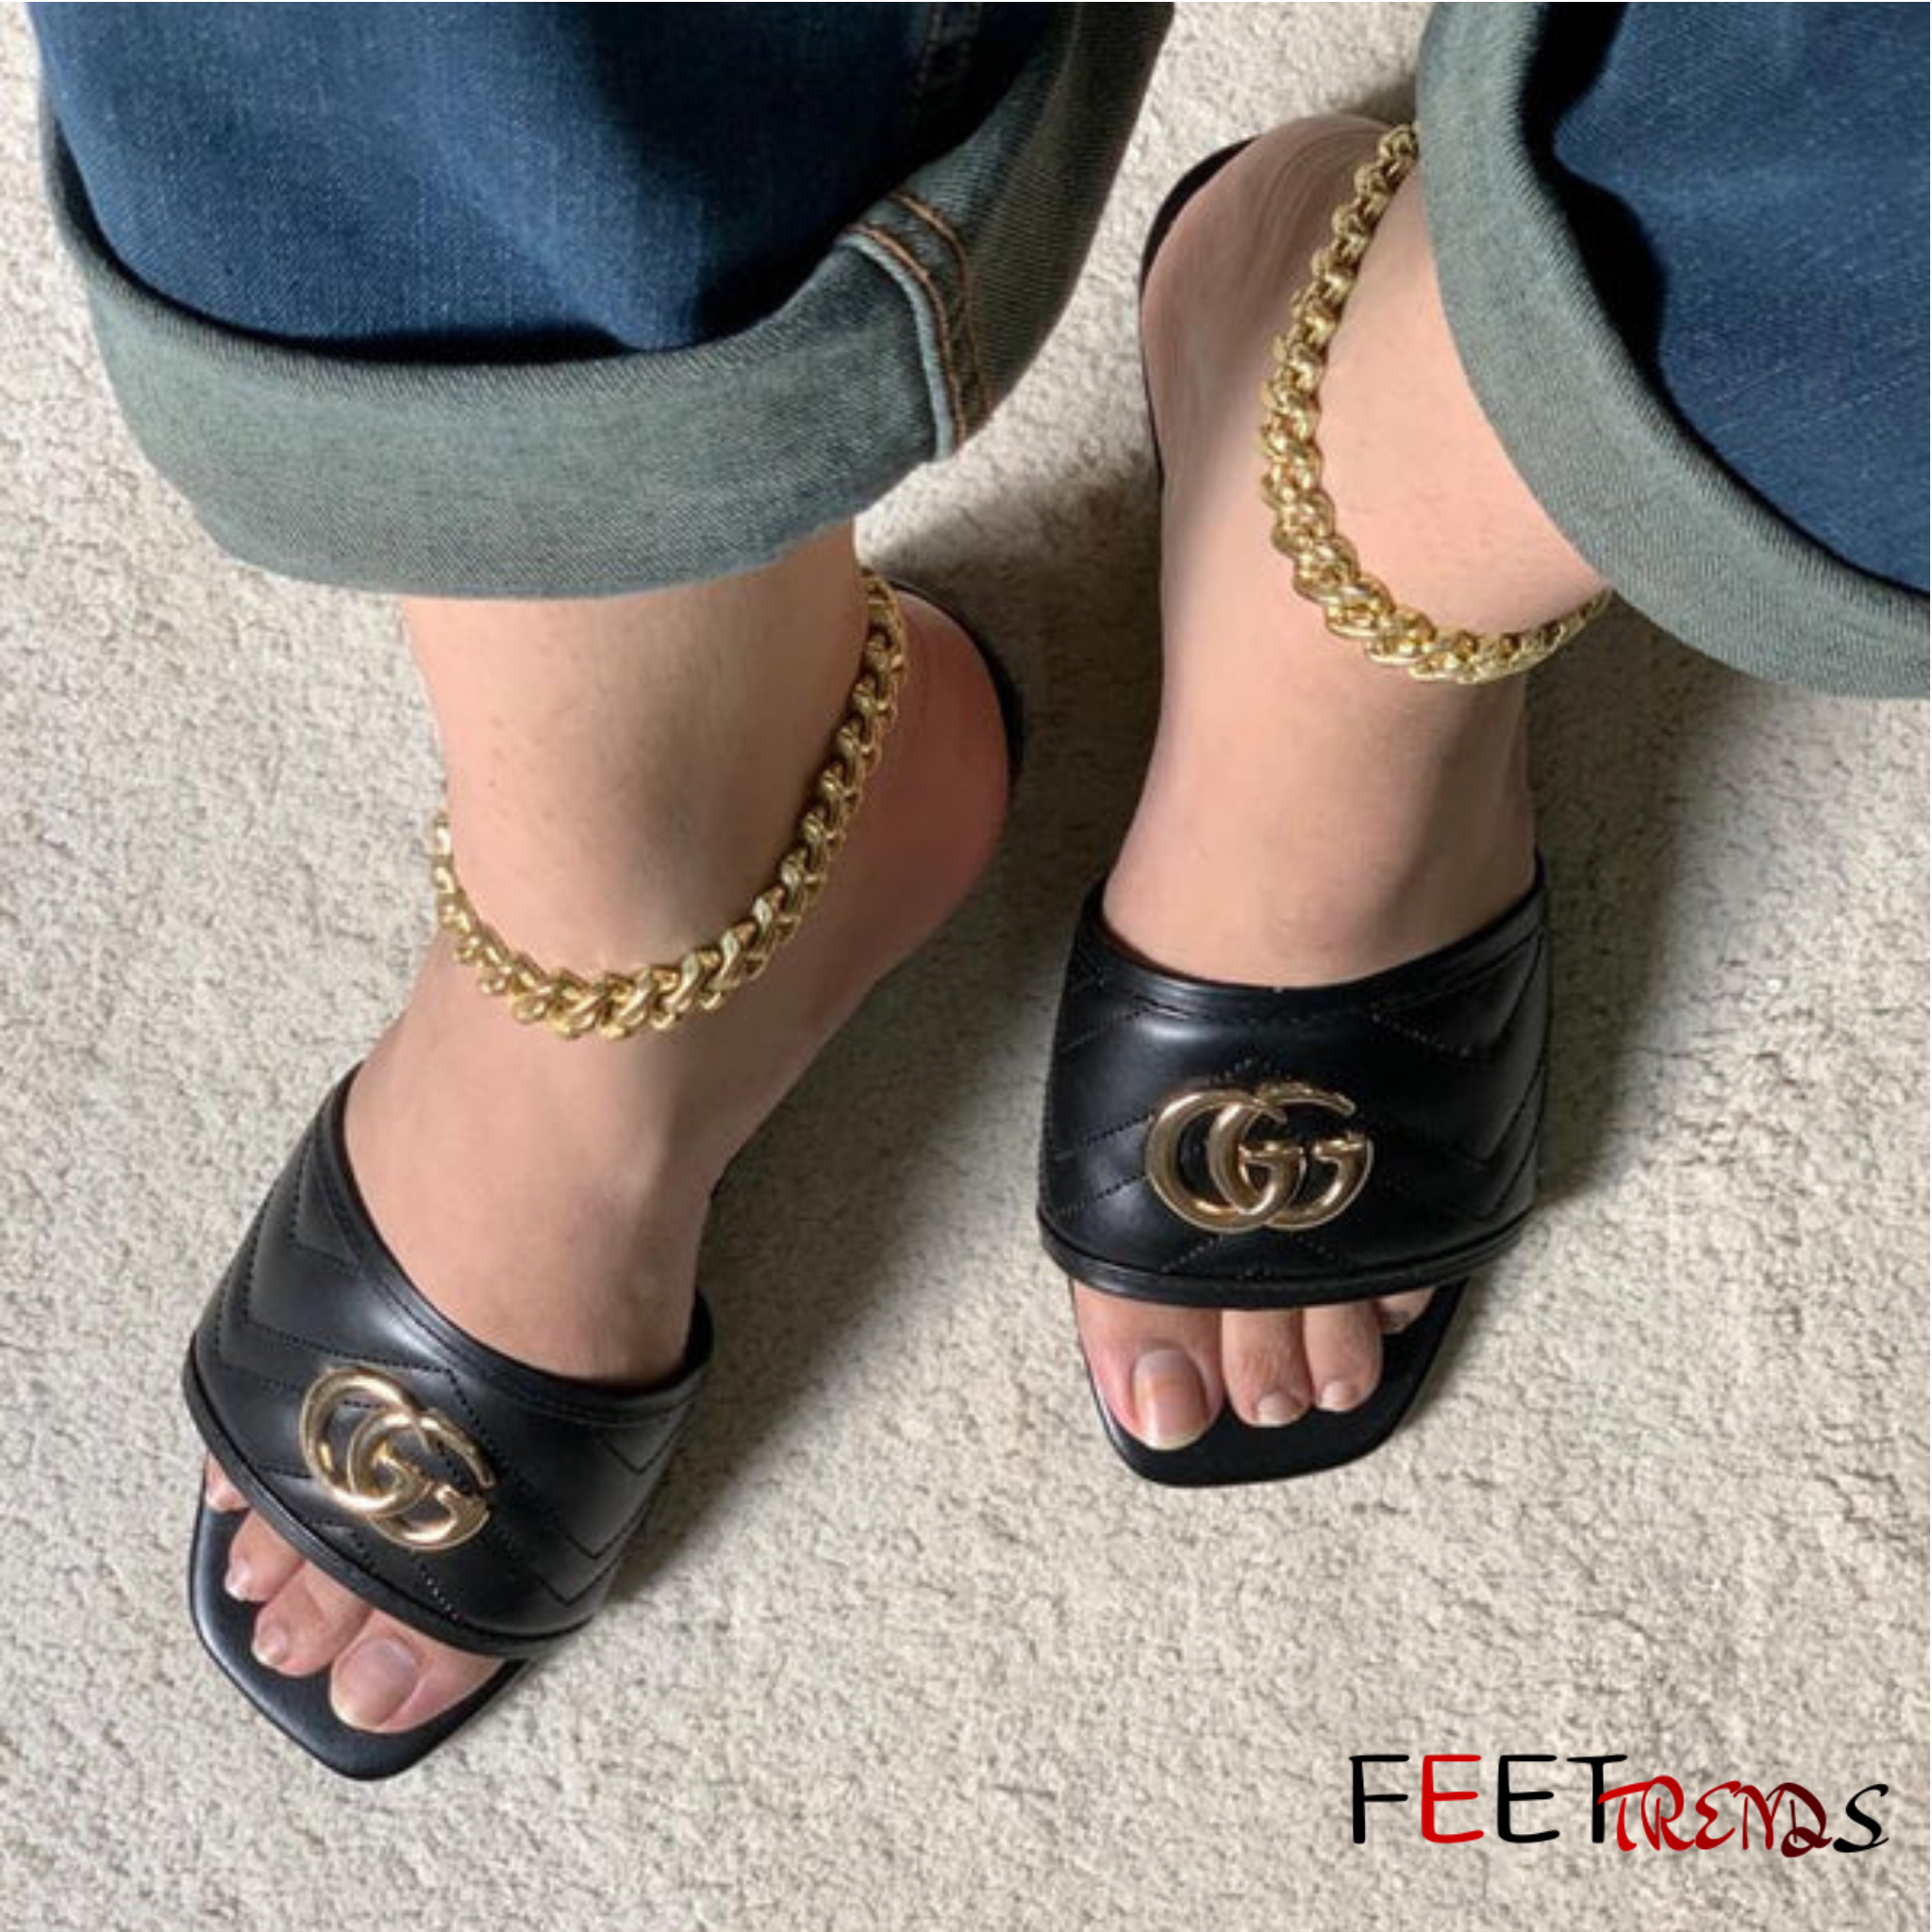 FEET TRENDS ARTICLE {038}